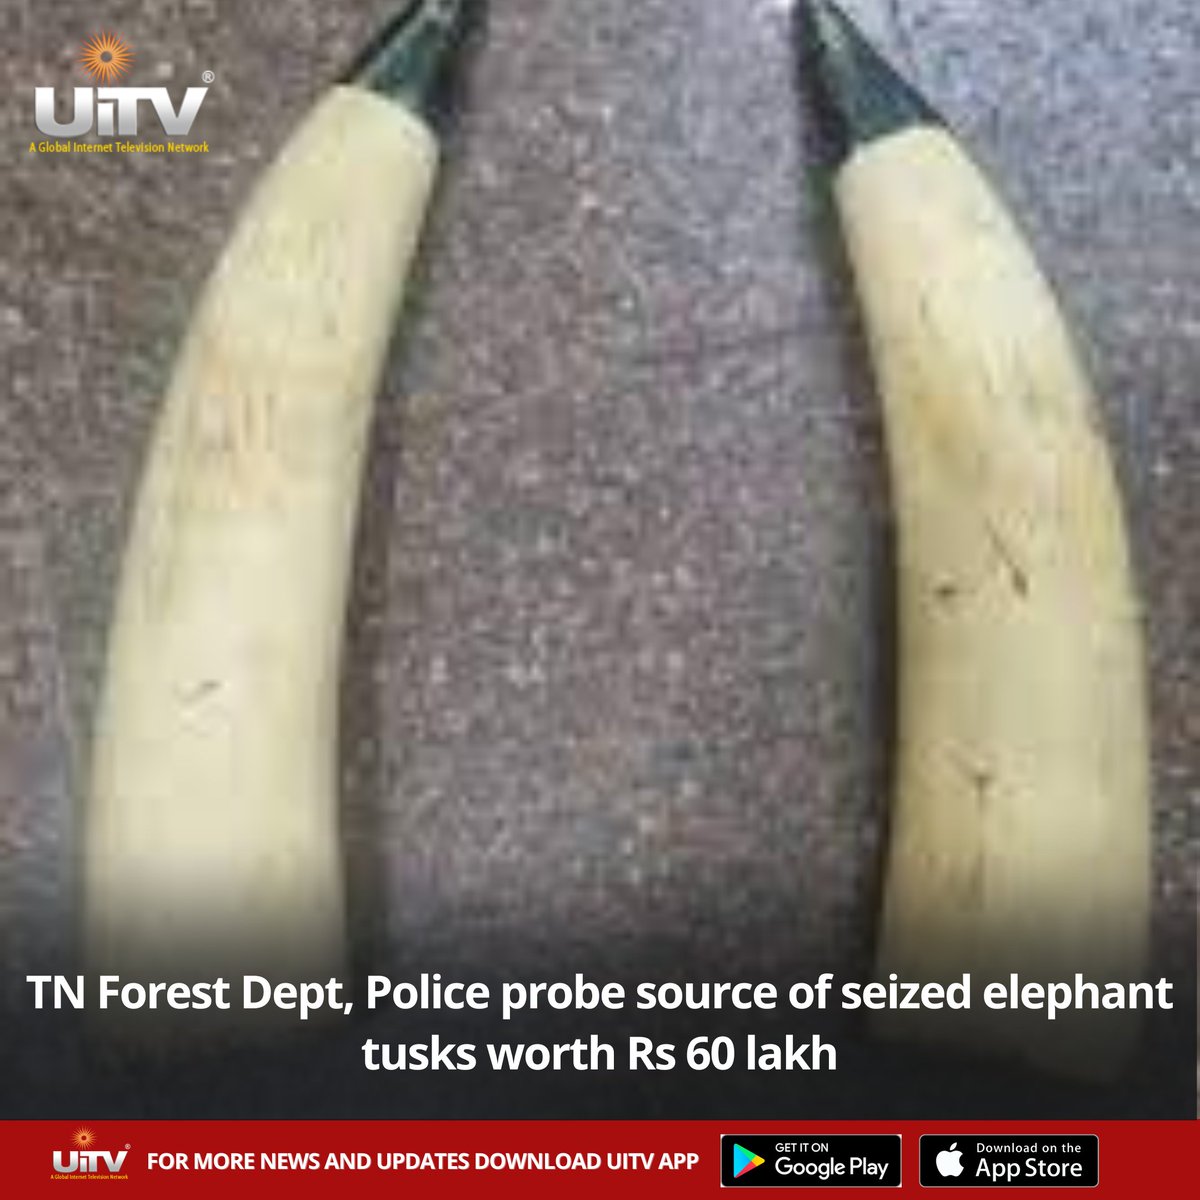 Authorities in Tamil Nadu are cracking down on wildlife crime! The Forest Department and Police are investigating the source of seized elephant tusks worth Rs 60 lakh. 🐘 #WildlifeCrime #TamilNadu #Elephants #Forestdeparment